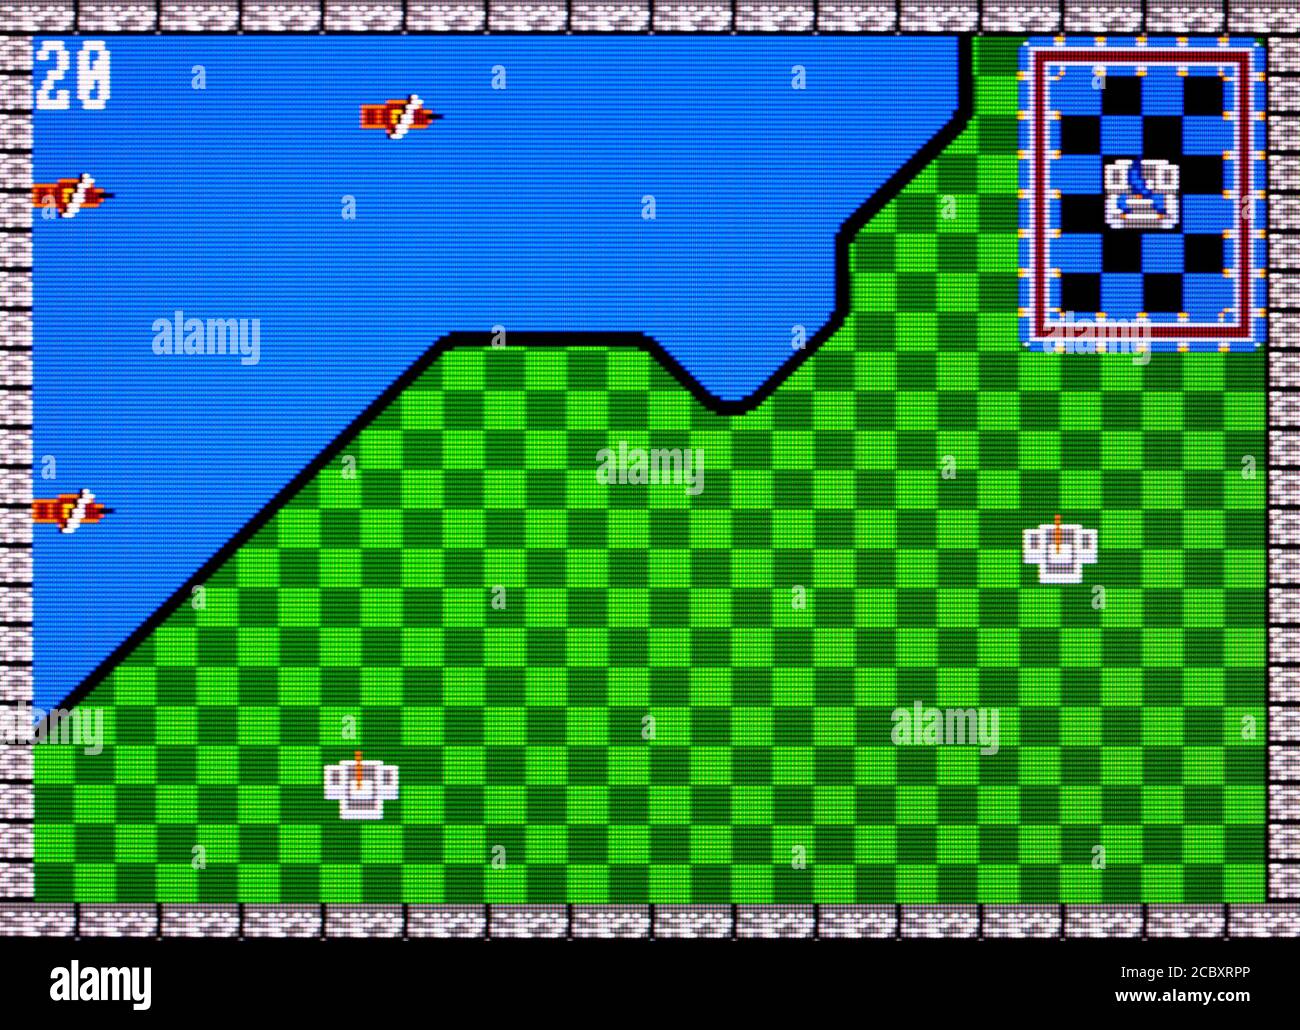 Rampart - Sega Master System - SMS - editorial use only Stock Photo